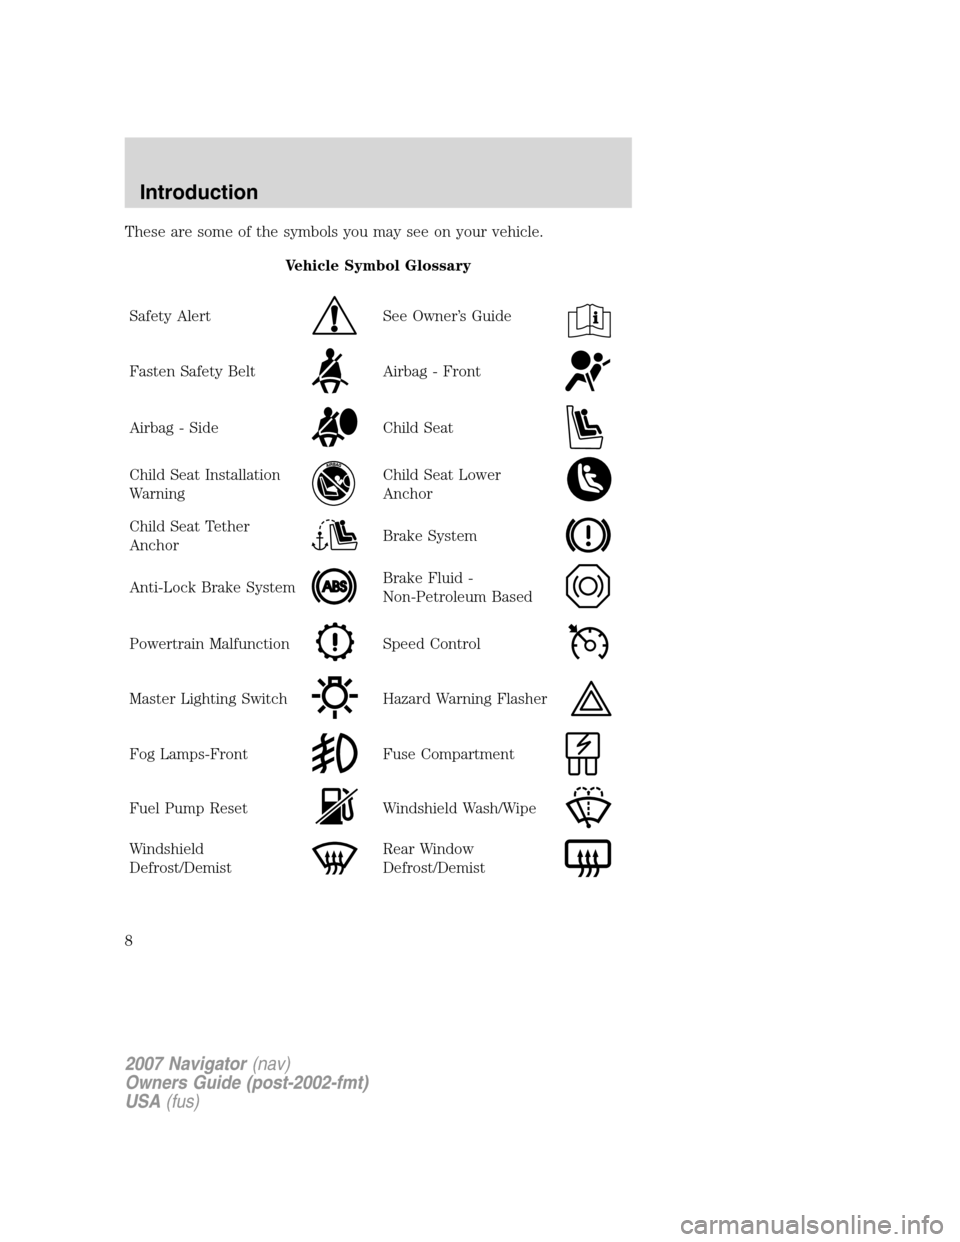 LINCOLN NAVIGATOR 2007  Owners Manual These are some of the symbols you may see on your vehicle.
Vehicle Symbol Glossary
Safety Alert
See Owner’s Guide
Fasten Safety BeltAirbag - Front
Airbag - SideChild Seat
Child Seat Installation
War